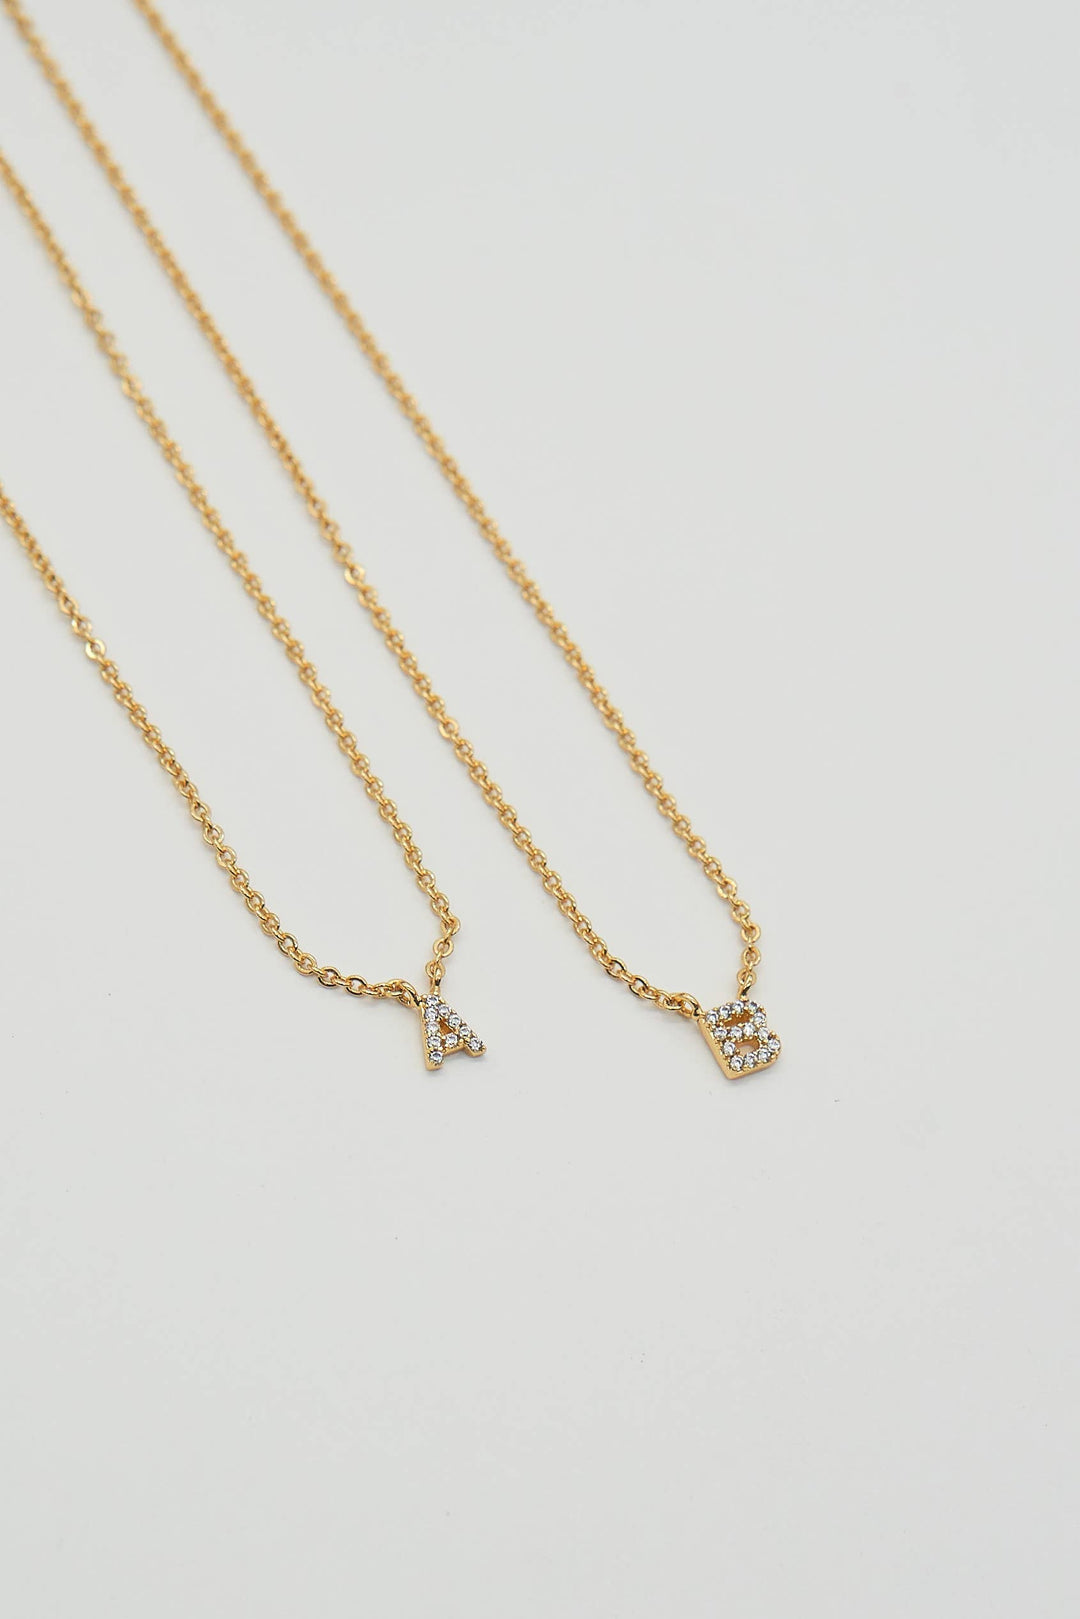 Shiny Initial Necklace: Holiday Favorite!: D